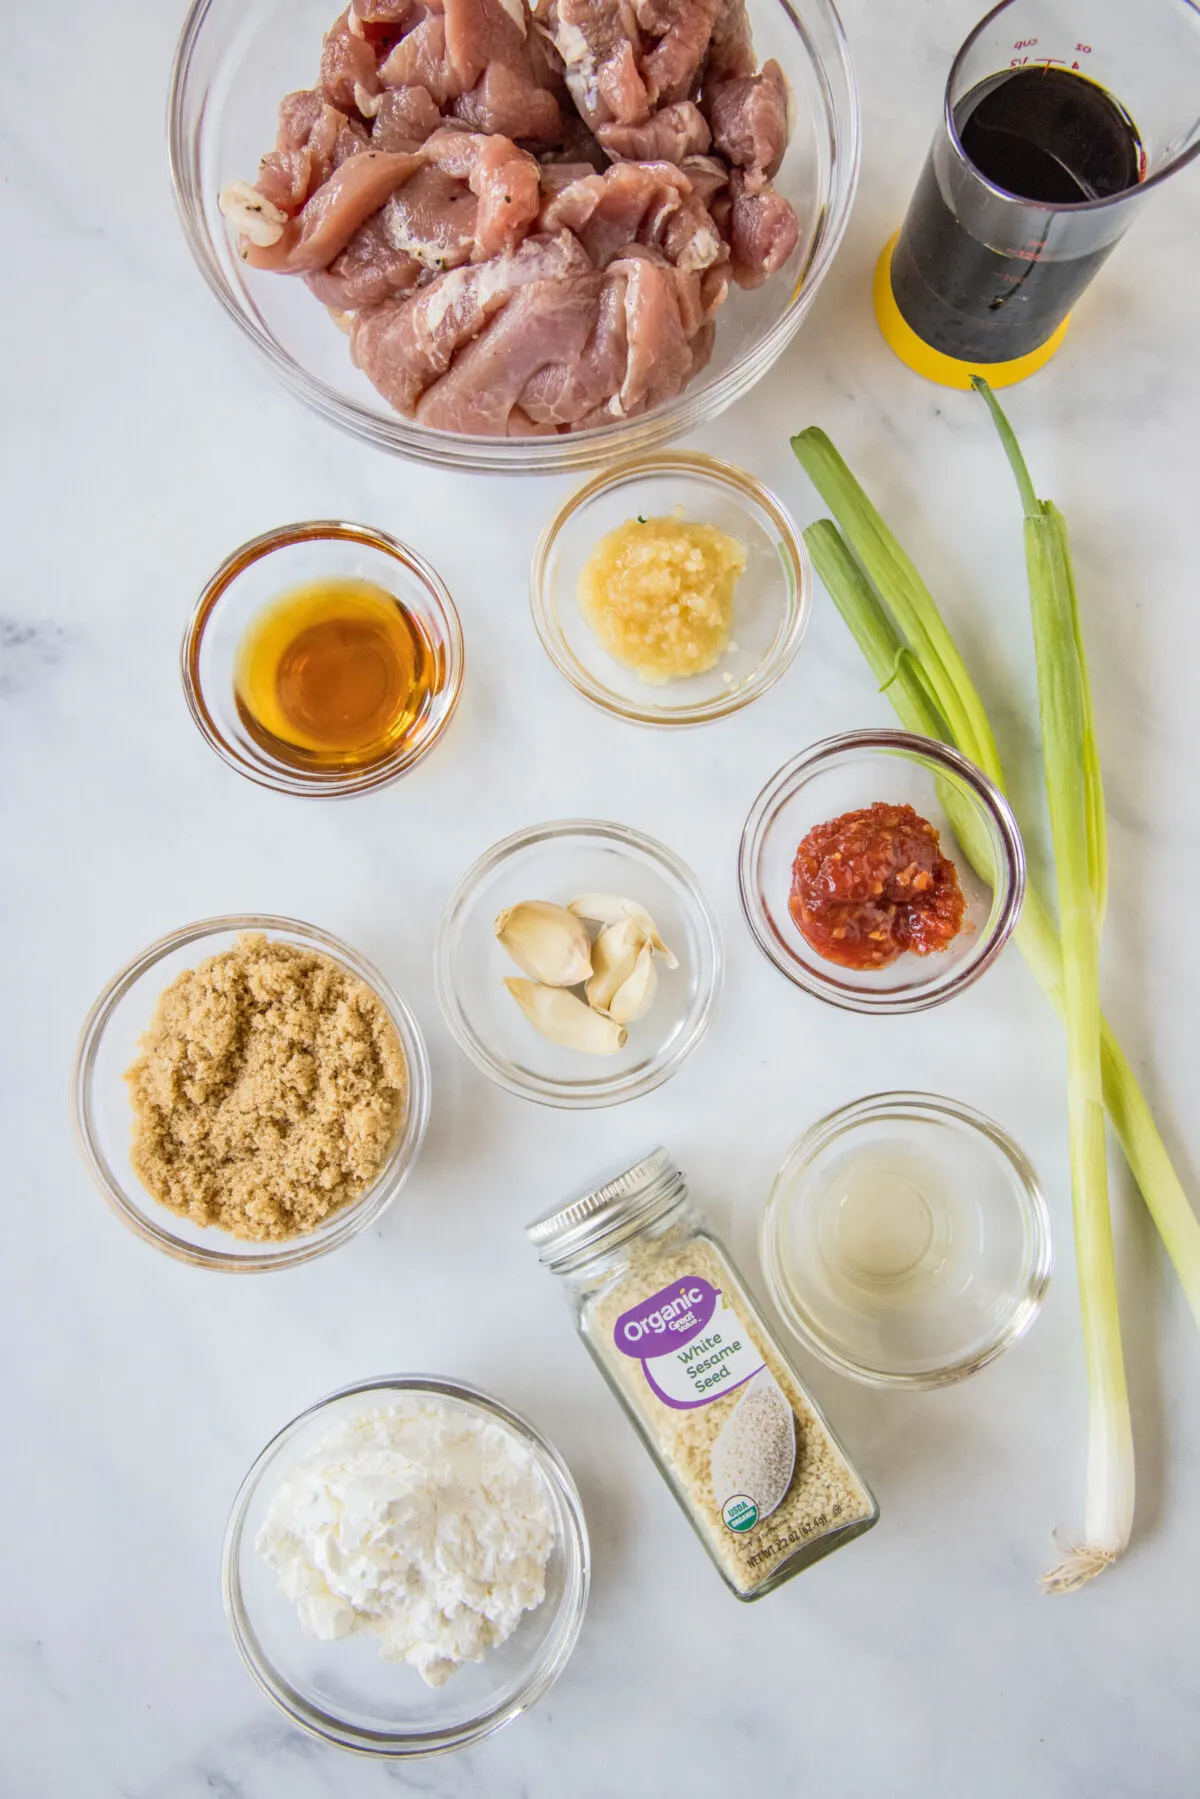 Overhead view of the ingredients needed for Mongolian pork: a bowl of pork strips, a glass of soy sauce, a glass of vinegar, a bowl of ginger, a bowl of garlic, a bowl of cornstarch, a bowl of brown sugar, a bowl of sesame oil, a jar of sesame seeds, a bowl of chili paste, and two green onions.